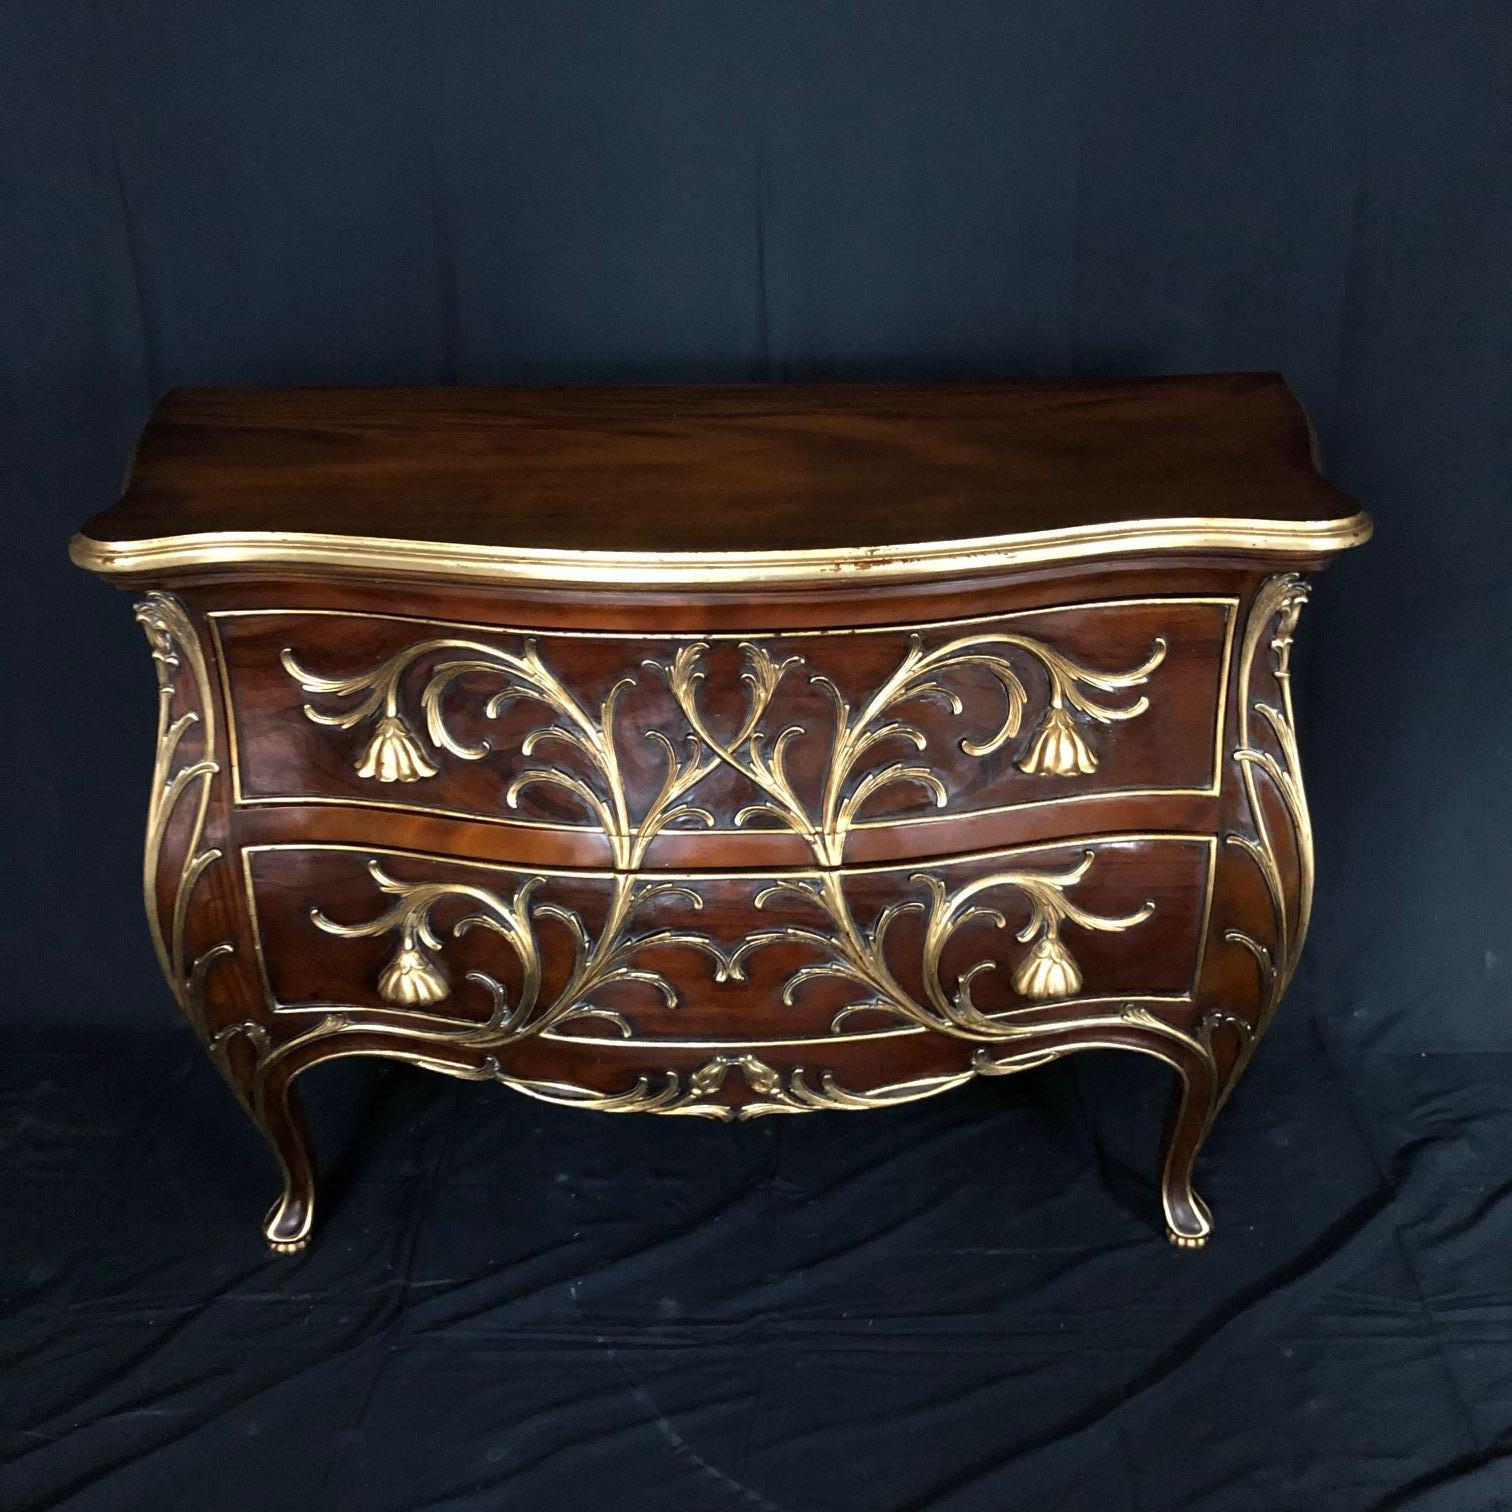 A sublime Louis XV style serpentine walnut gilt trimmed chest of drawers having exquisite gold details that seamlessly extend into four pulls on the two drawers comprised of flowers. A work of art! 

#5174.